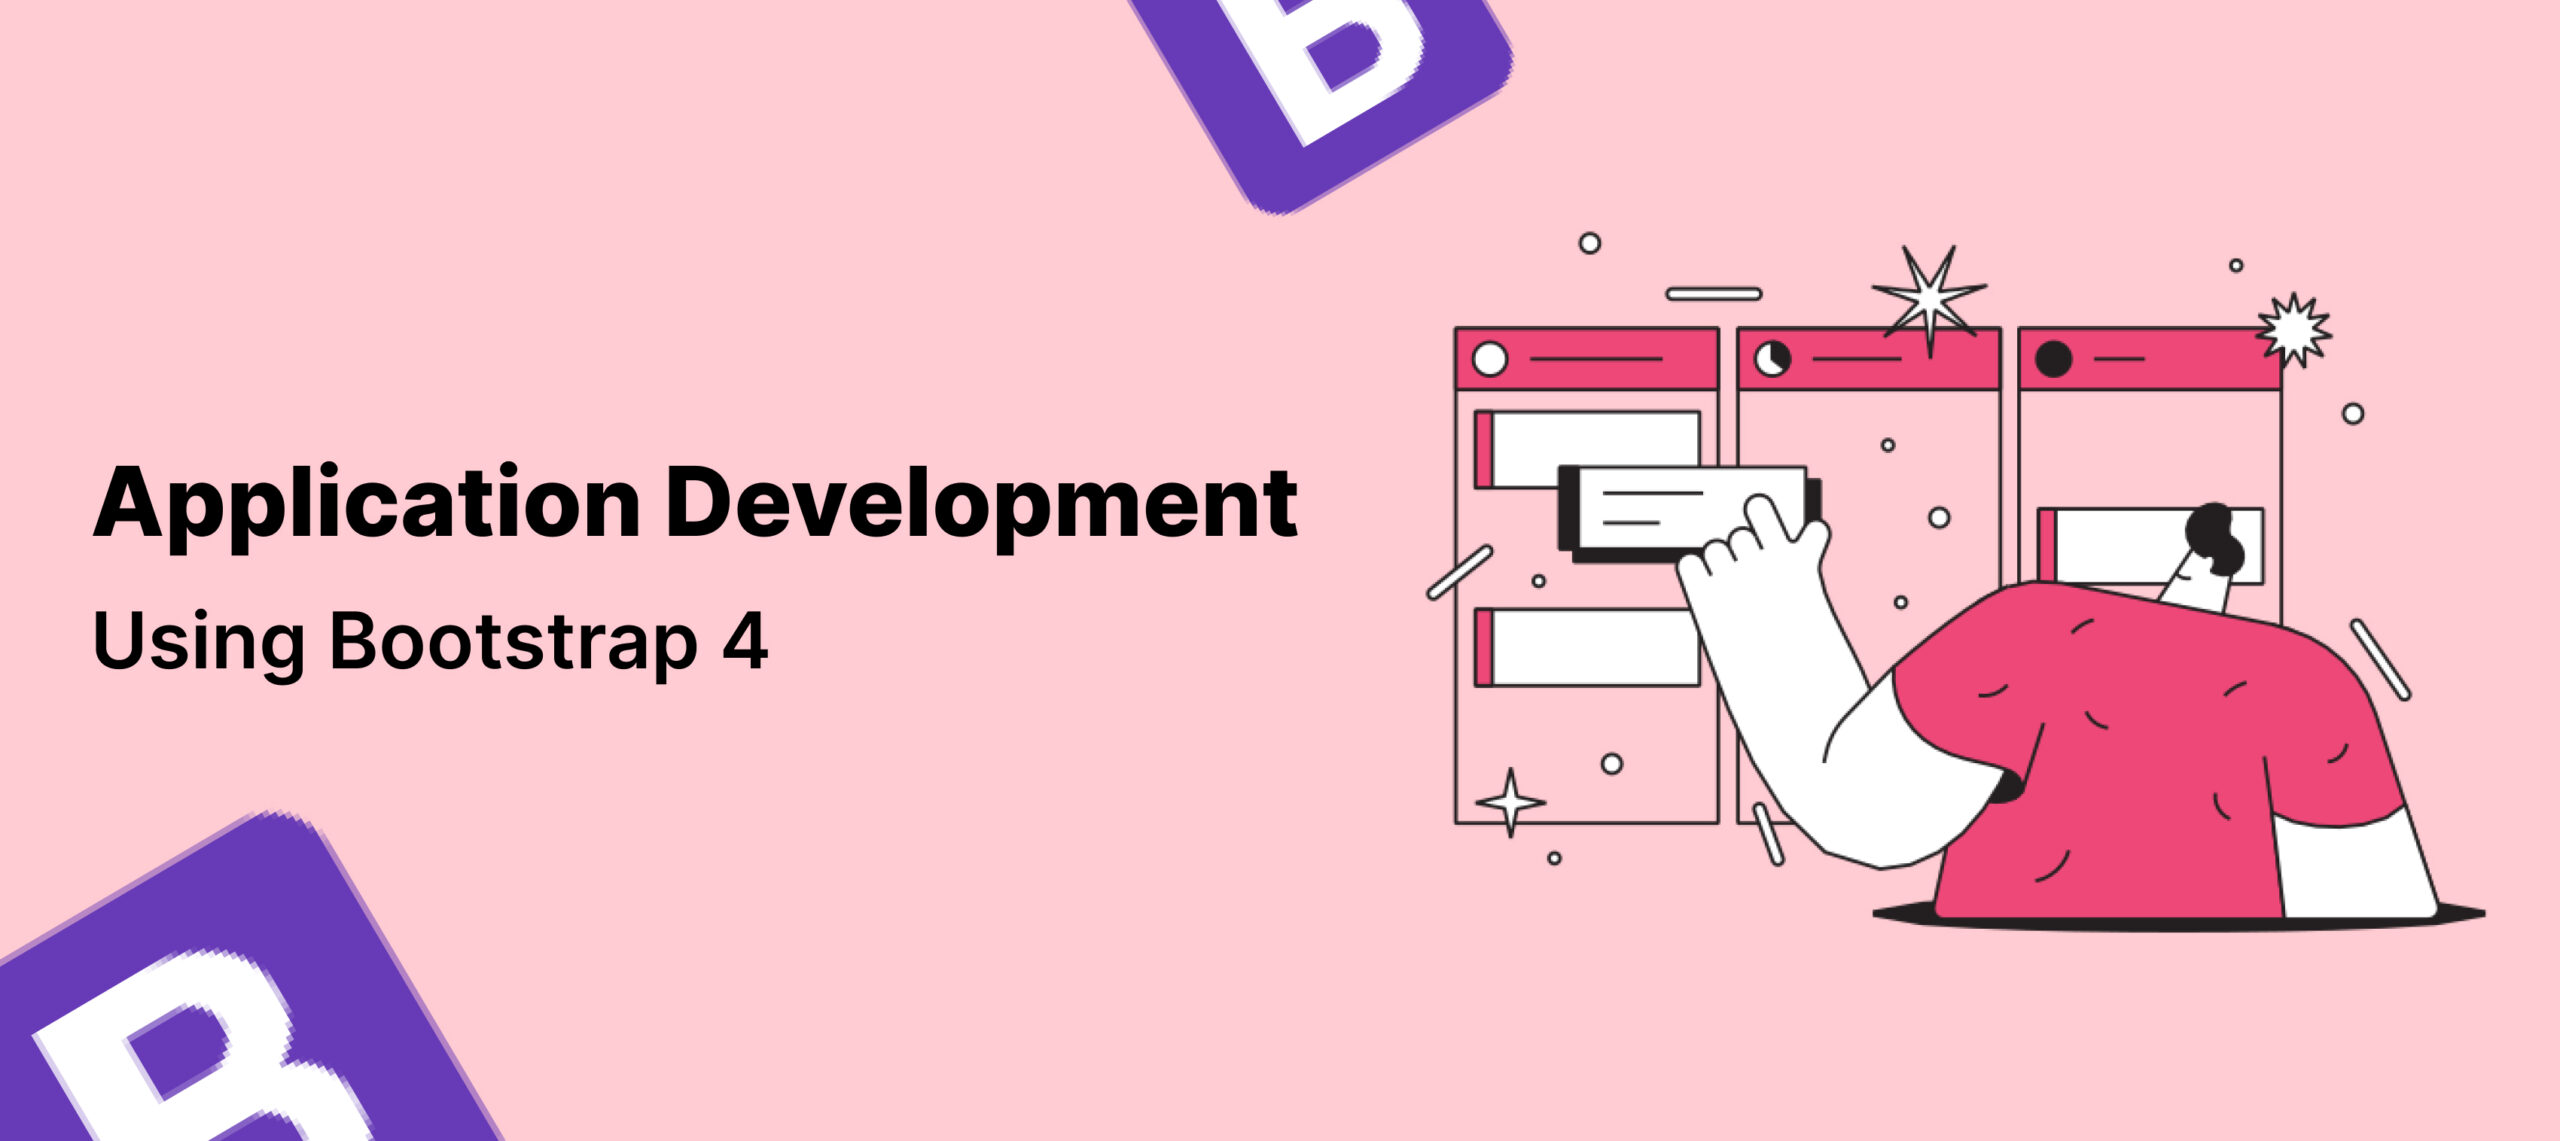  Best practices to speed up application development using Bootstrap